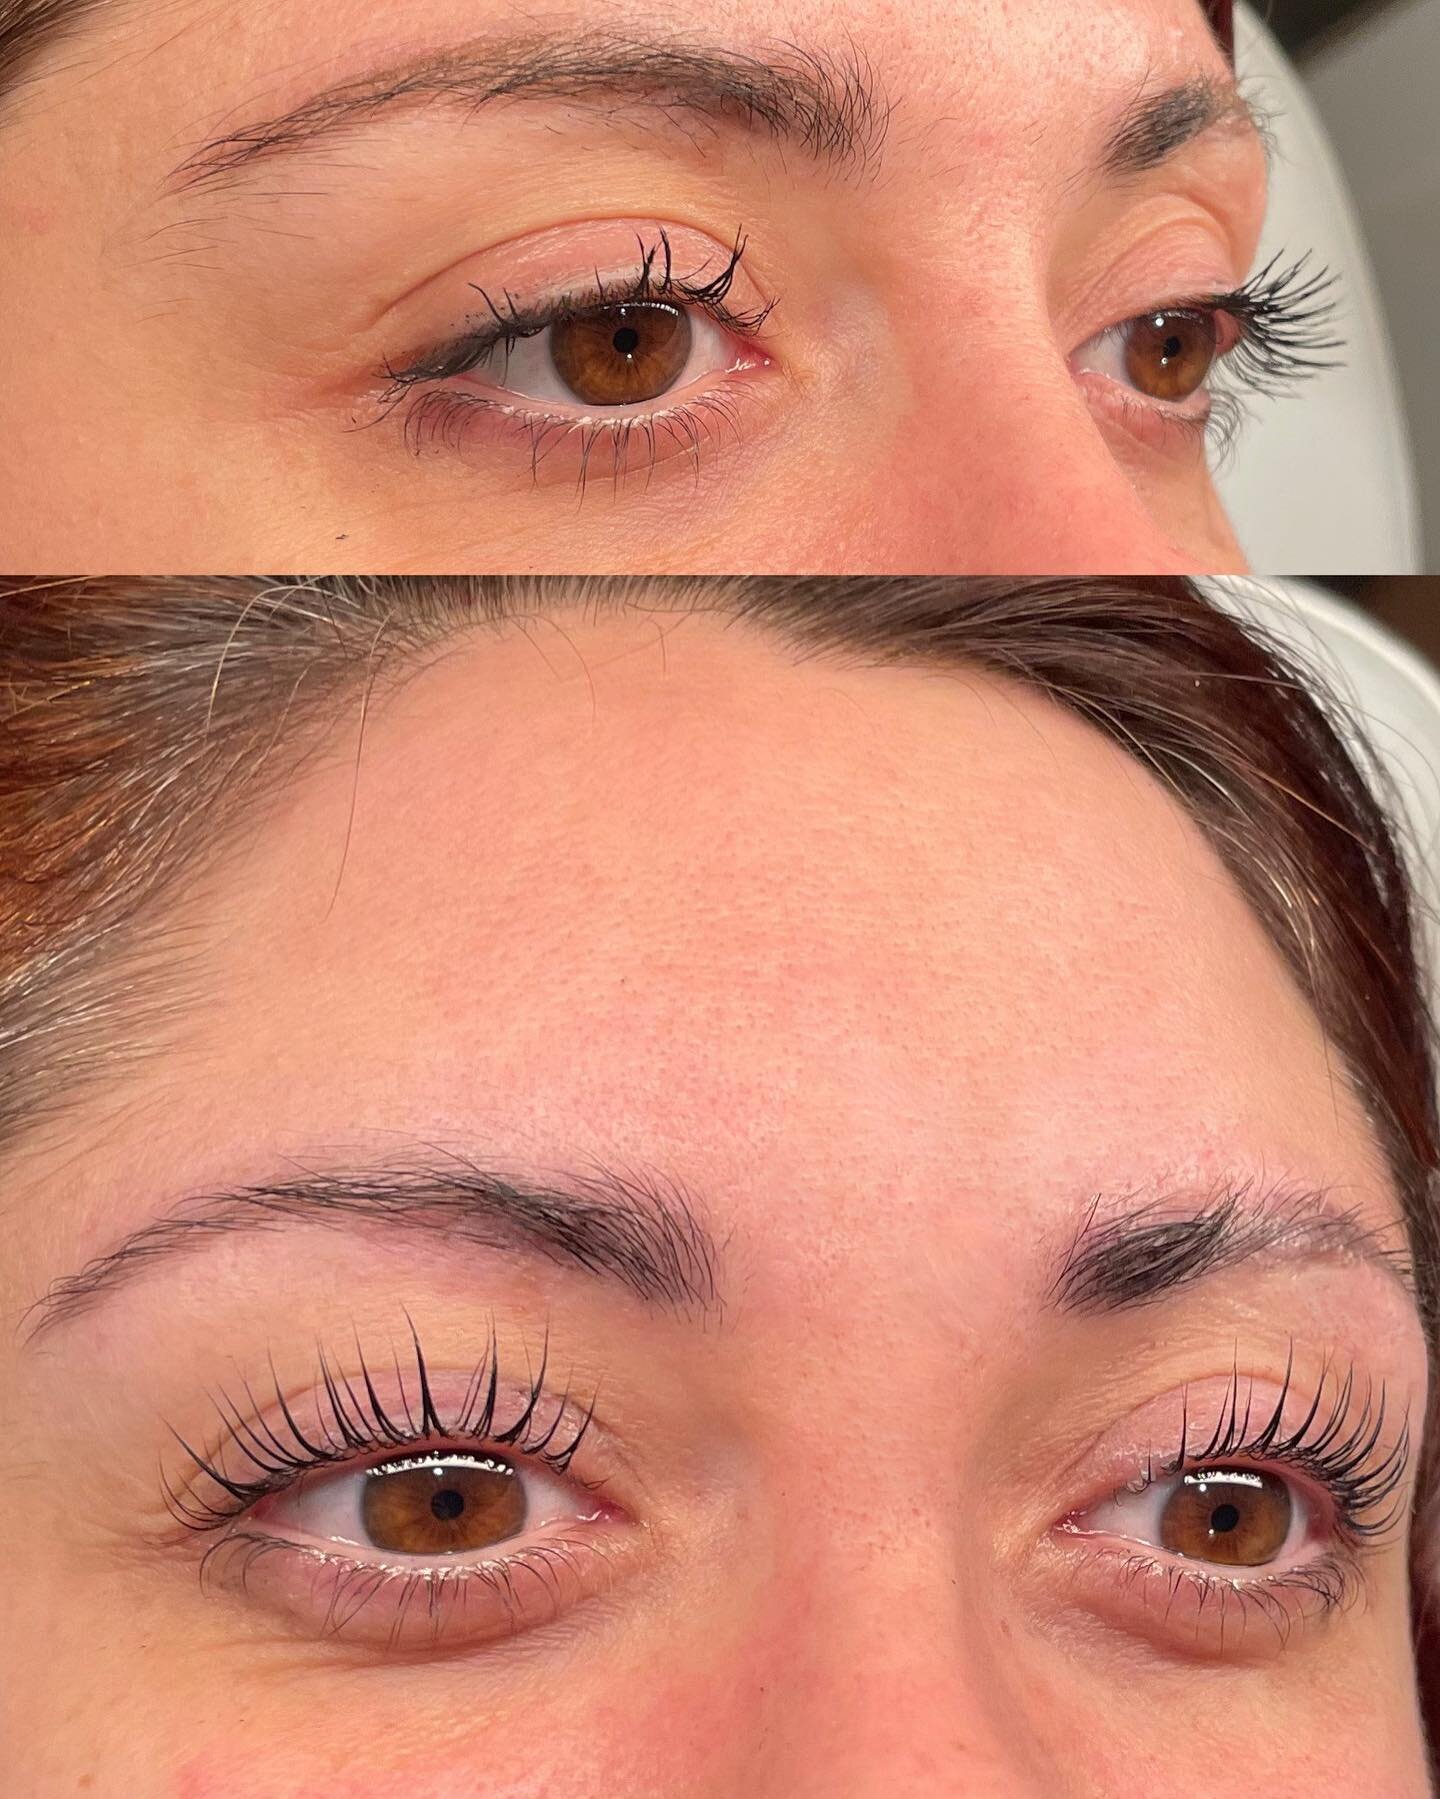 Lash lifts are such a subtle way to really open your eyes awaken your flirty self ! Special coming soon at BLB Studio for the month of November! Stay tuned ! 
.
.
.
.
.
#lashlift #northcowichan #beforeandafter #lashperm #duncanbeautysalon #duncanbc